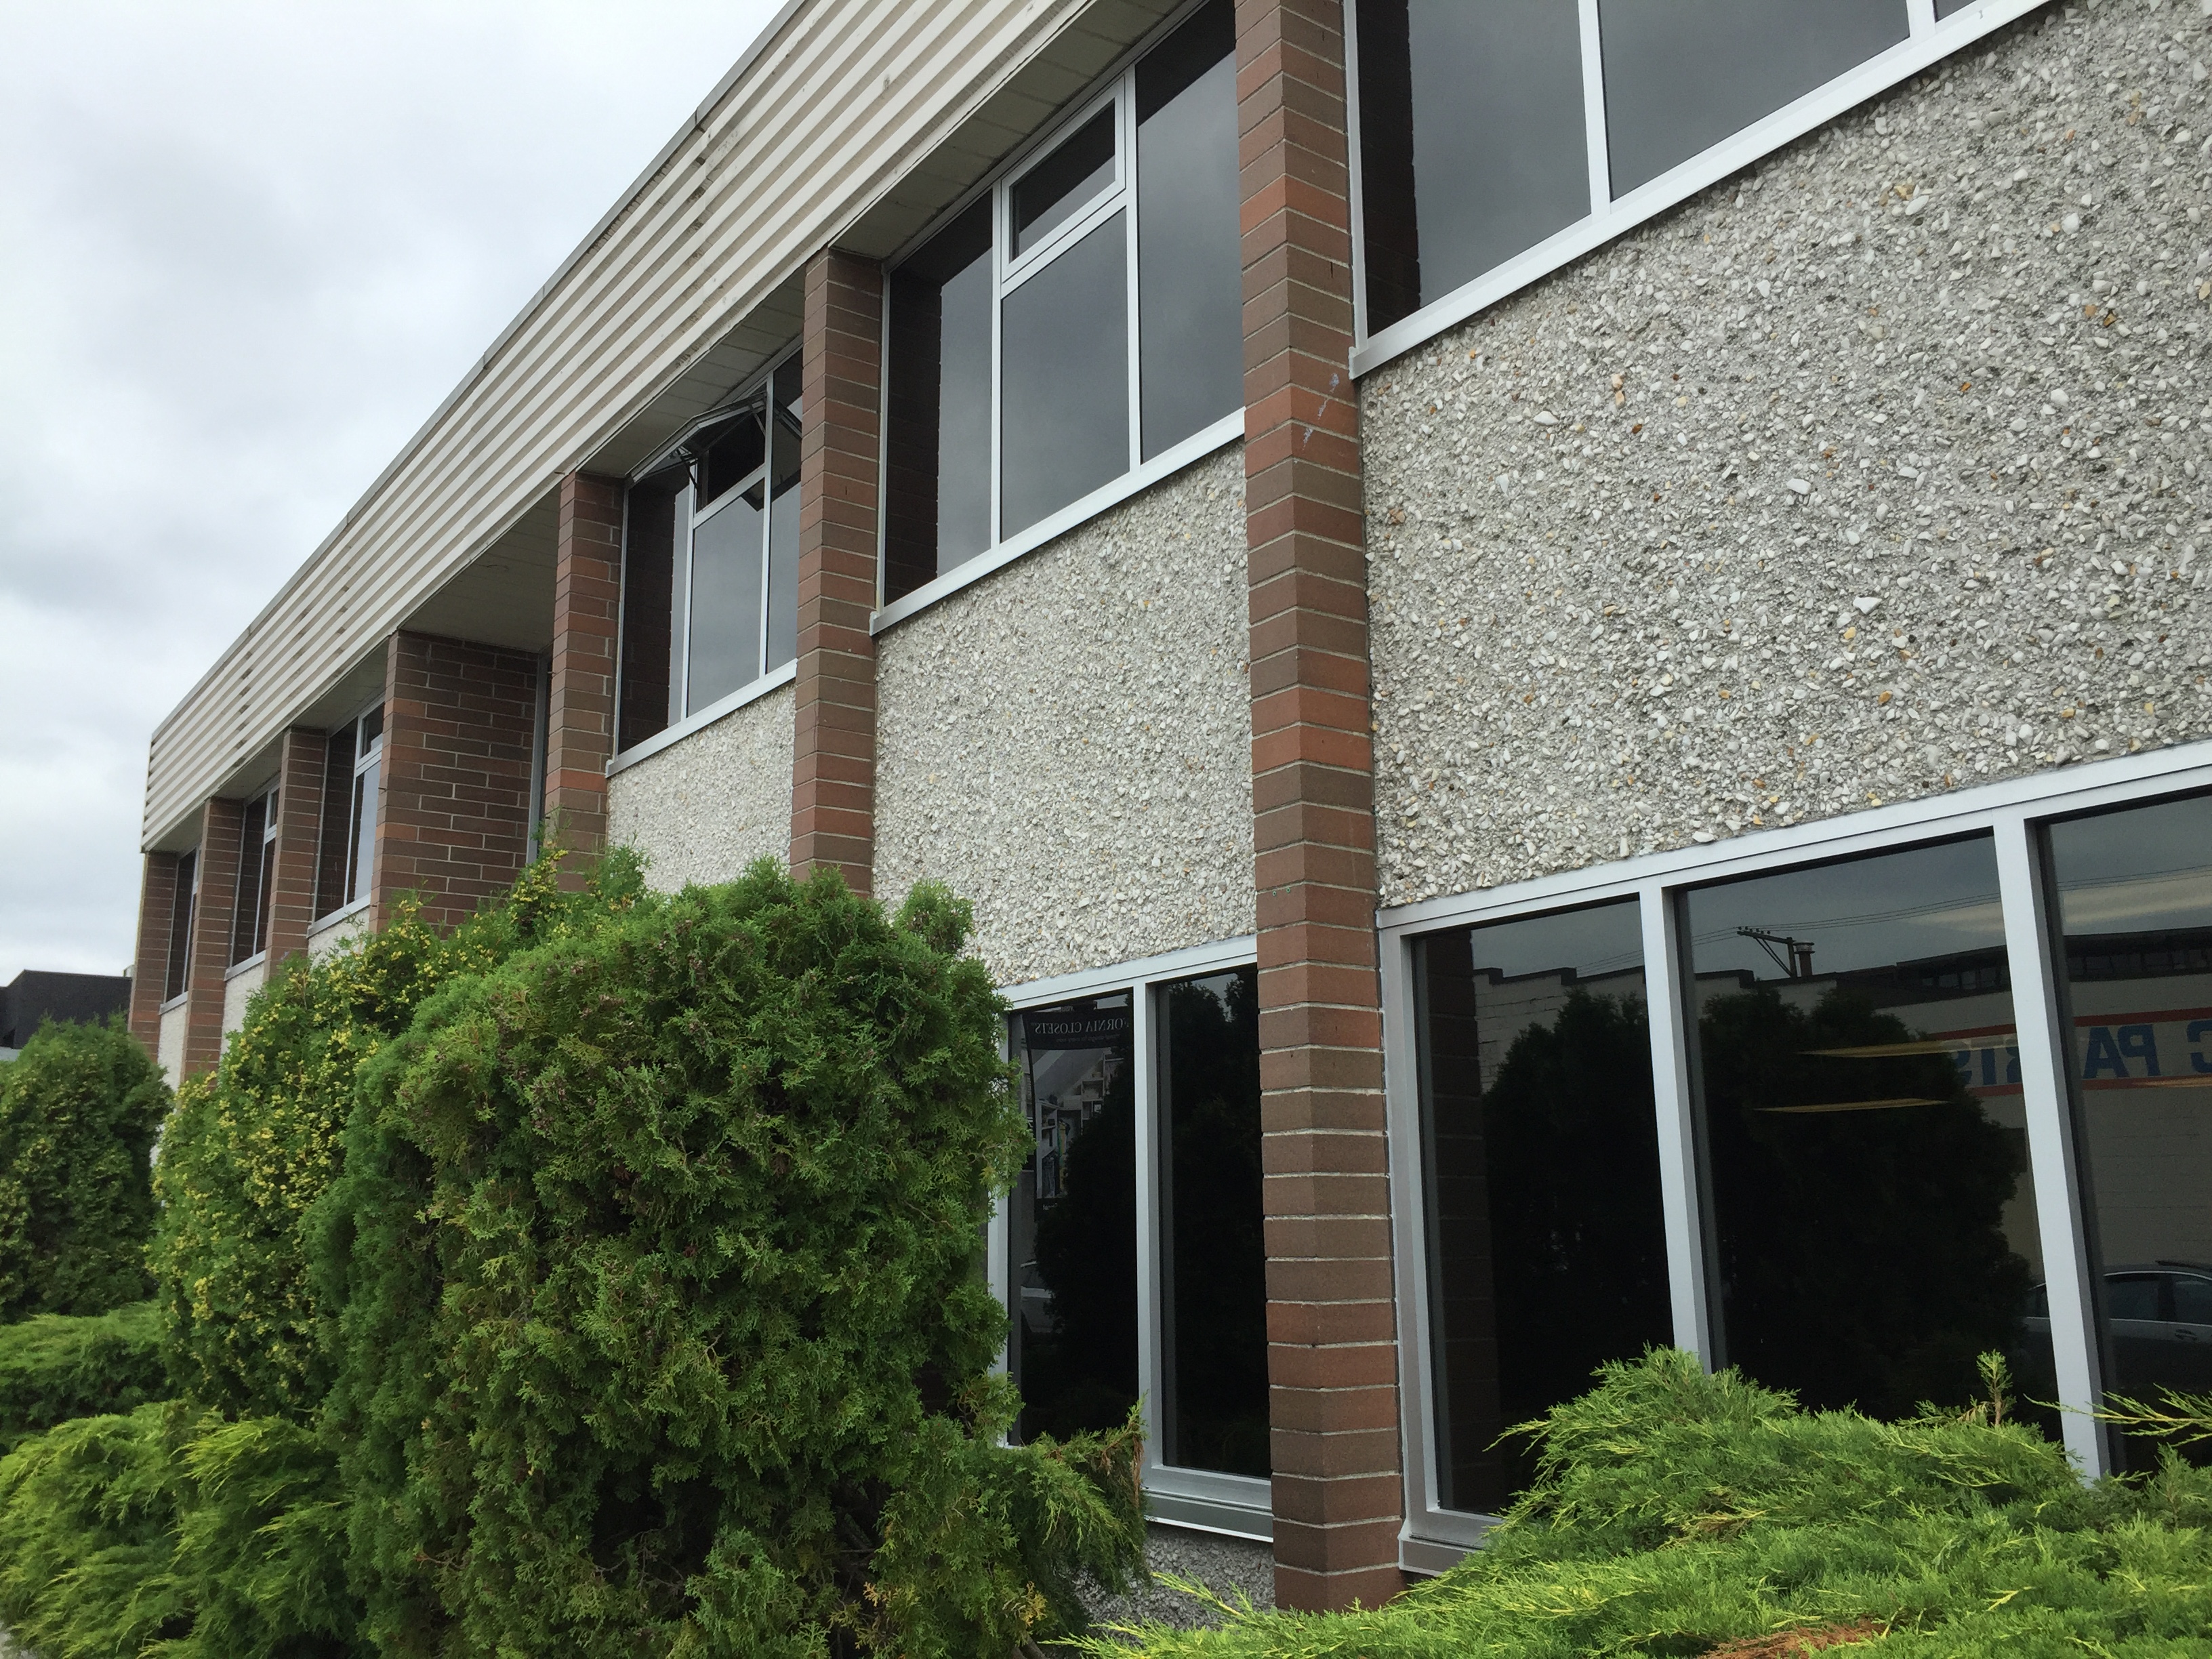 Commercial Window Replacement for this entire commercial mix use building with offices and warehouse.